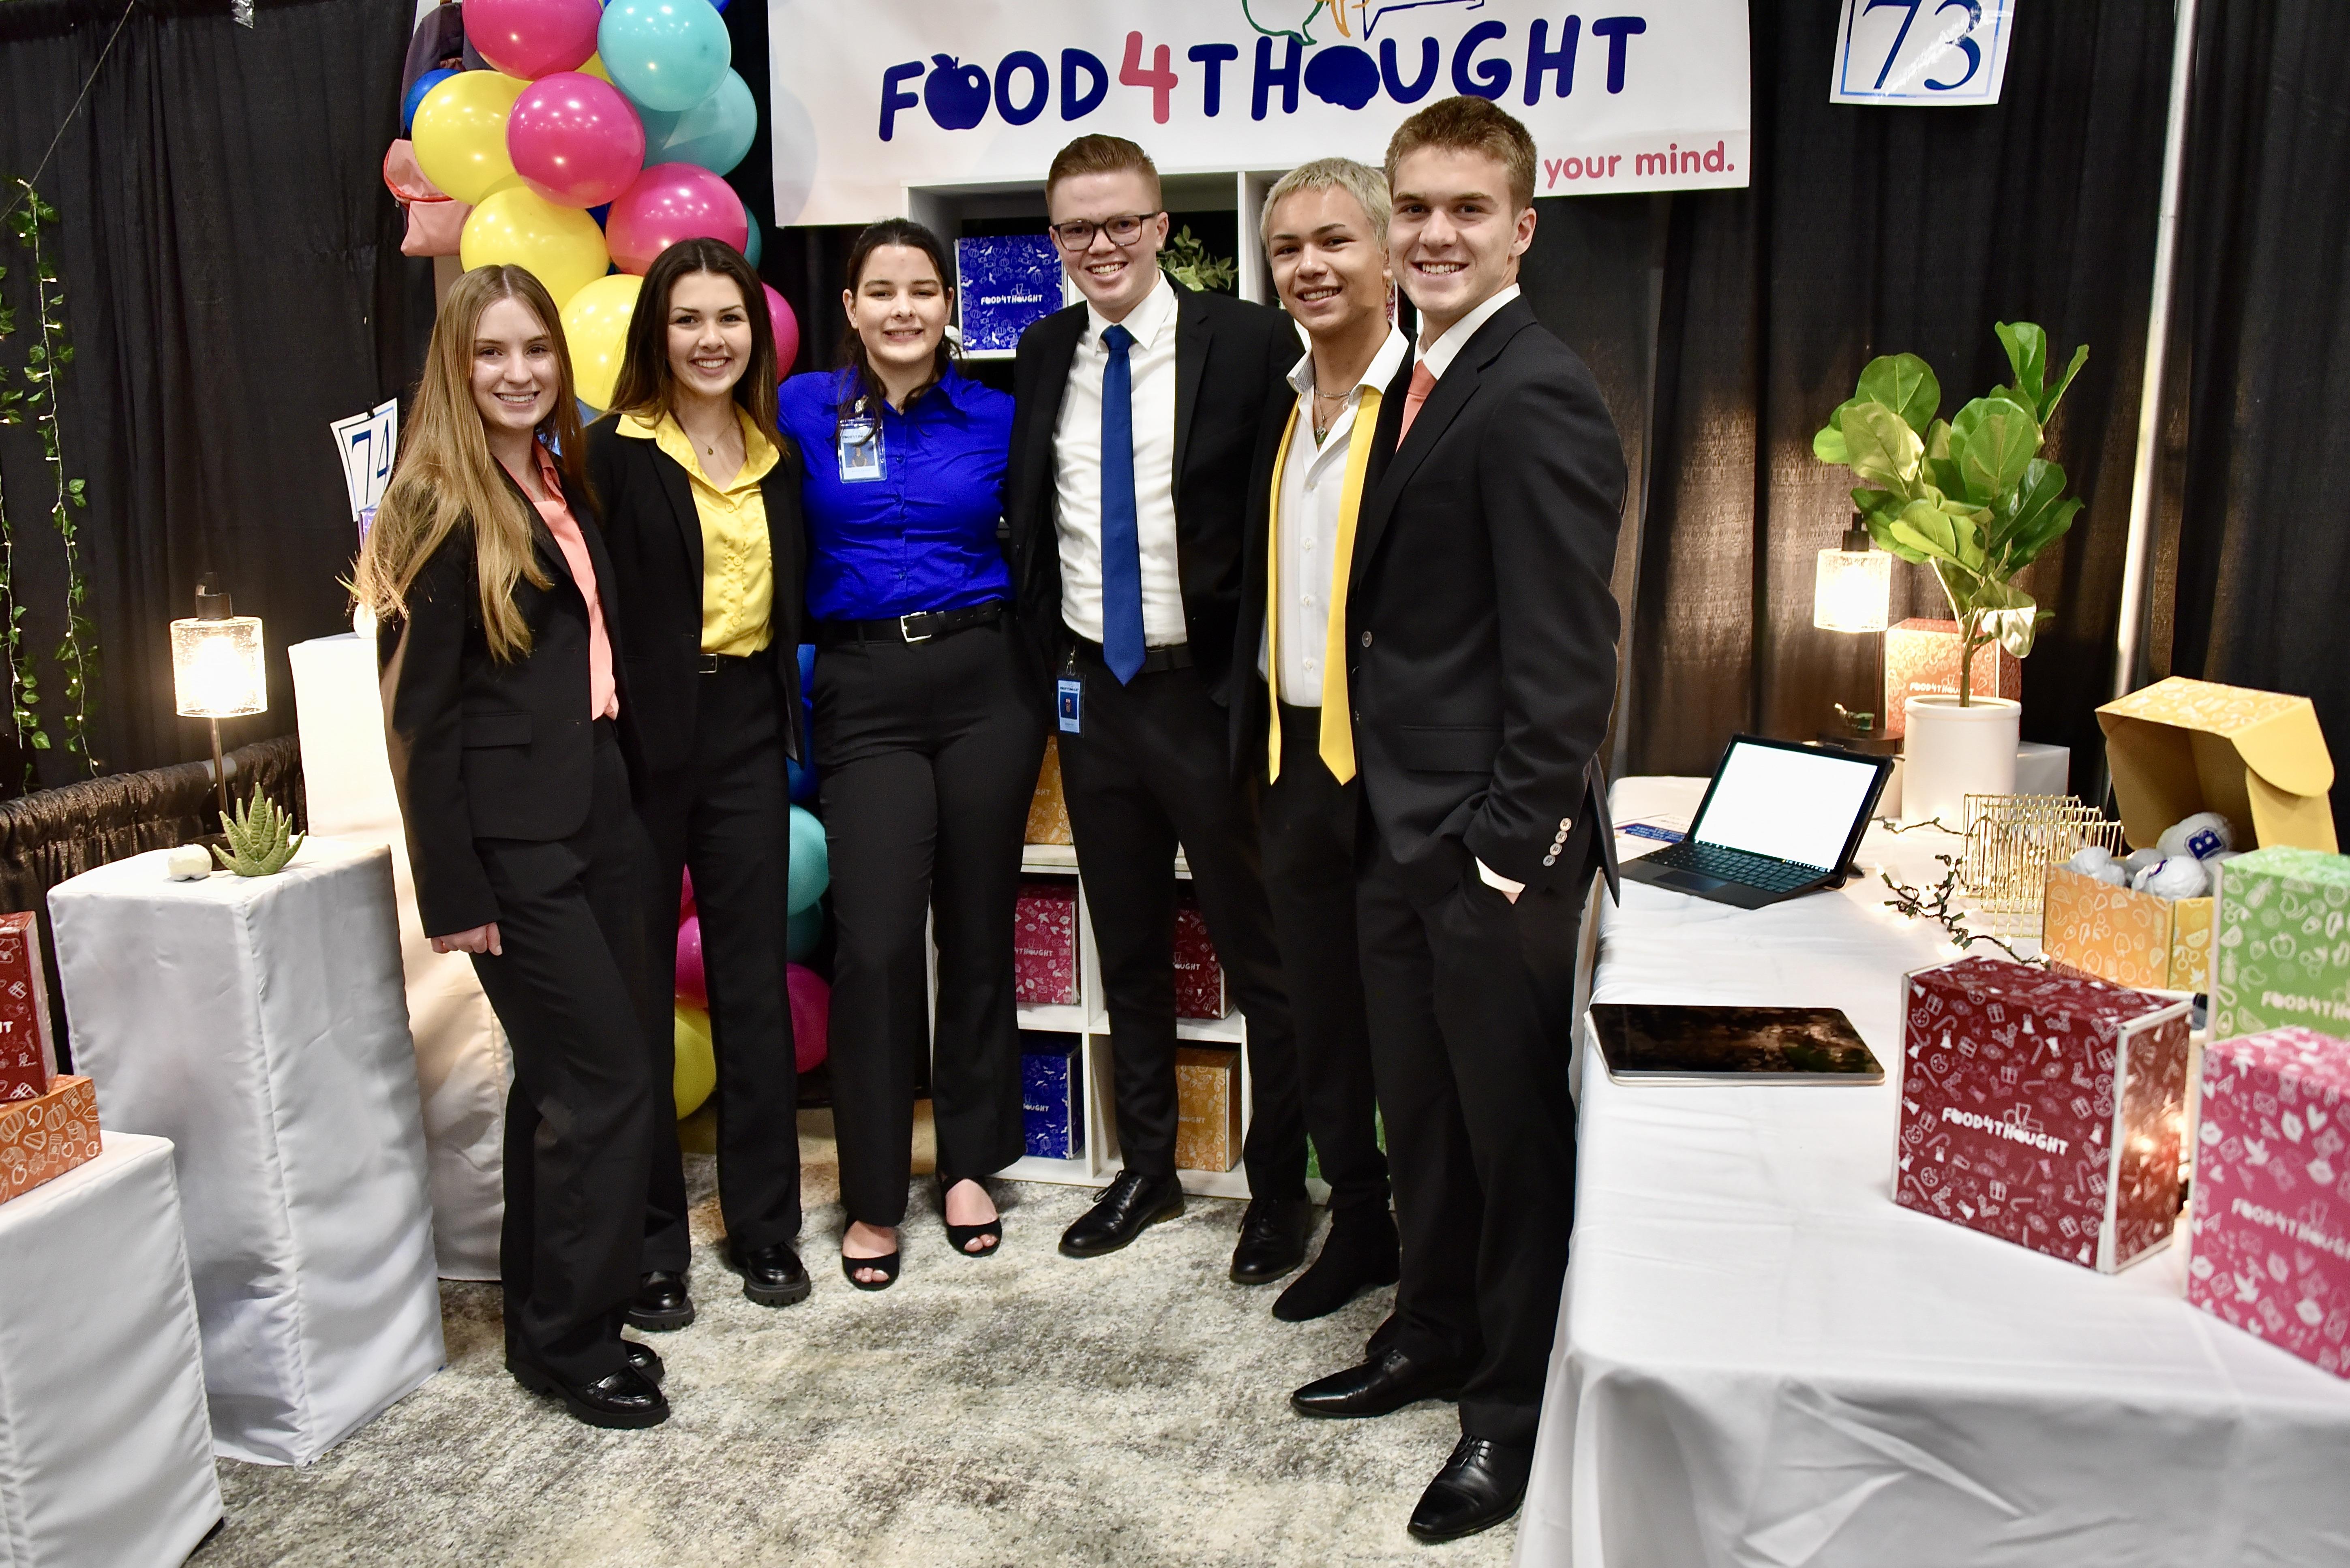 Bakersfield High School's Business Plan Team, Food4Thought, posing for a photo in front of their booth